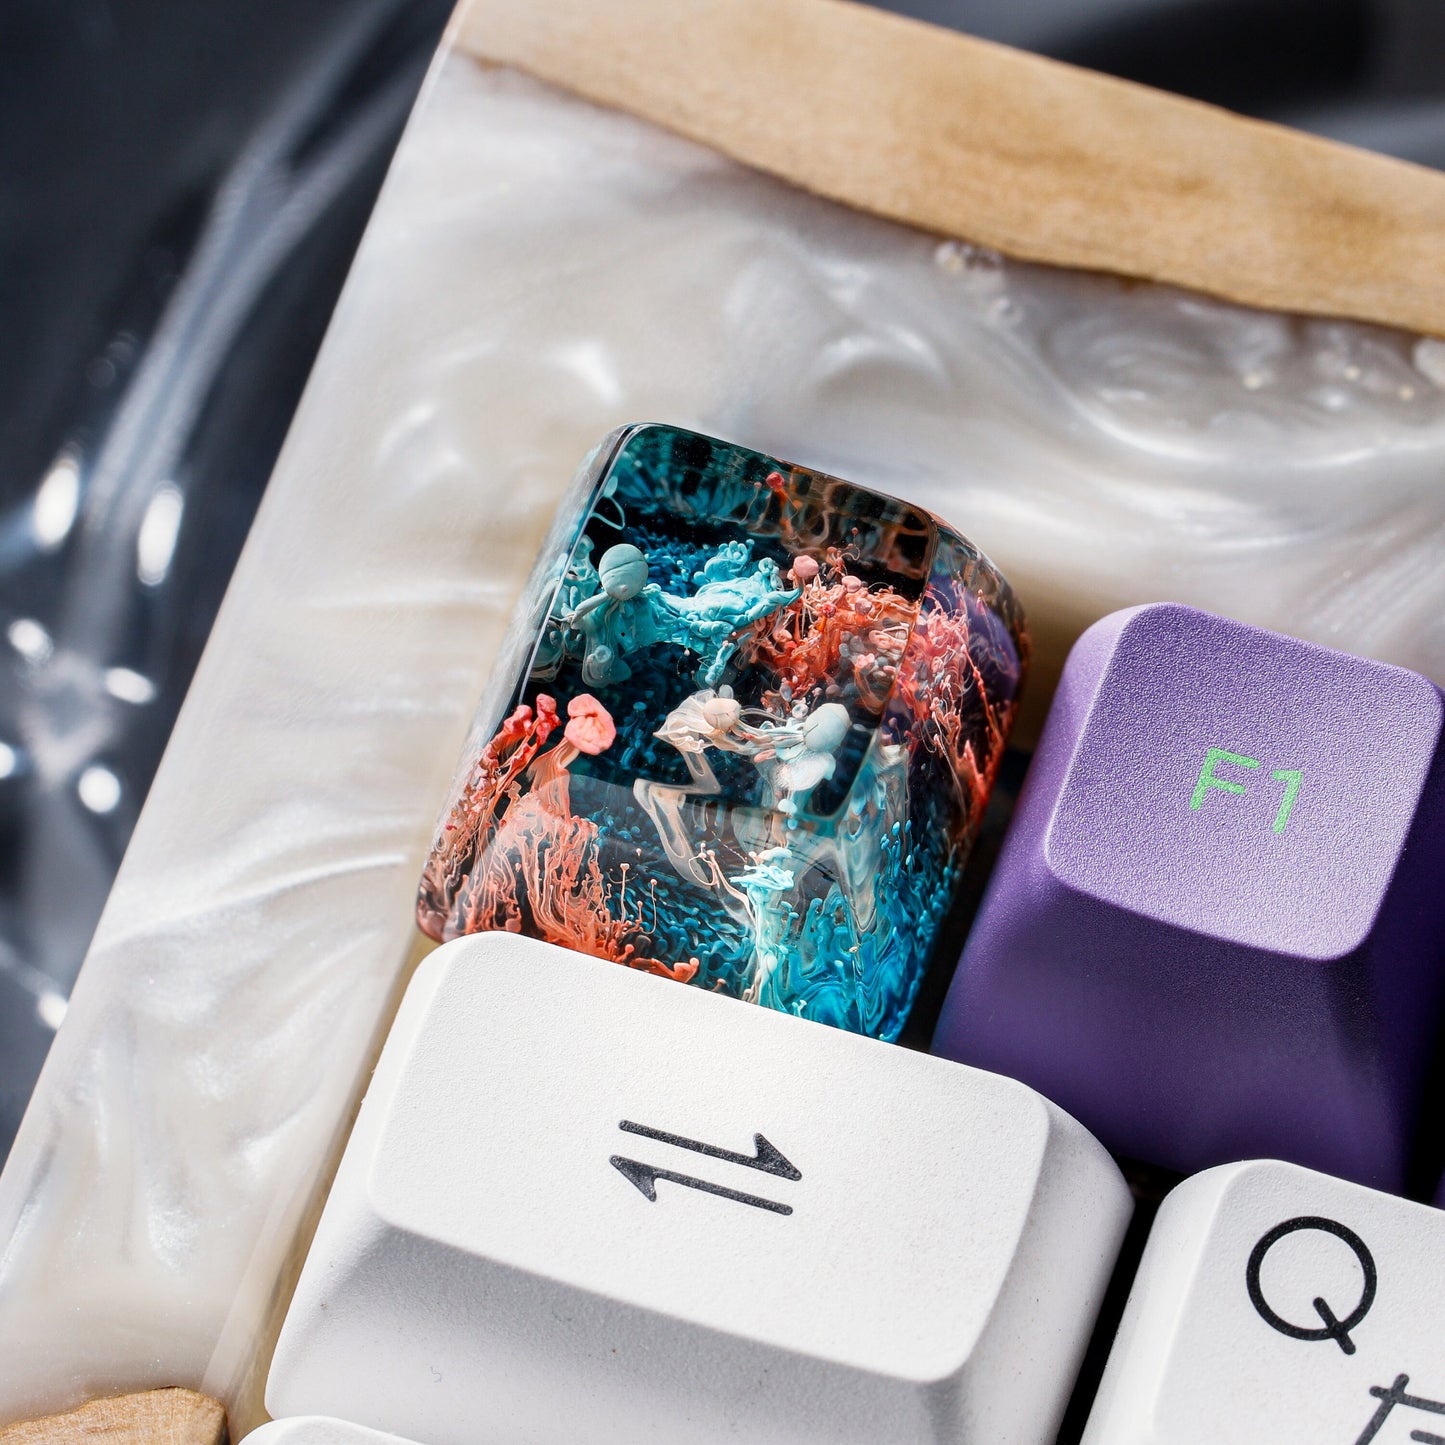 Red and Blue Coral Keycap- Ocean Keycap- Artisan Keycap- Keycap for MX Cherry Switches Keyboard - Datkey Studio